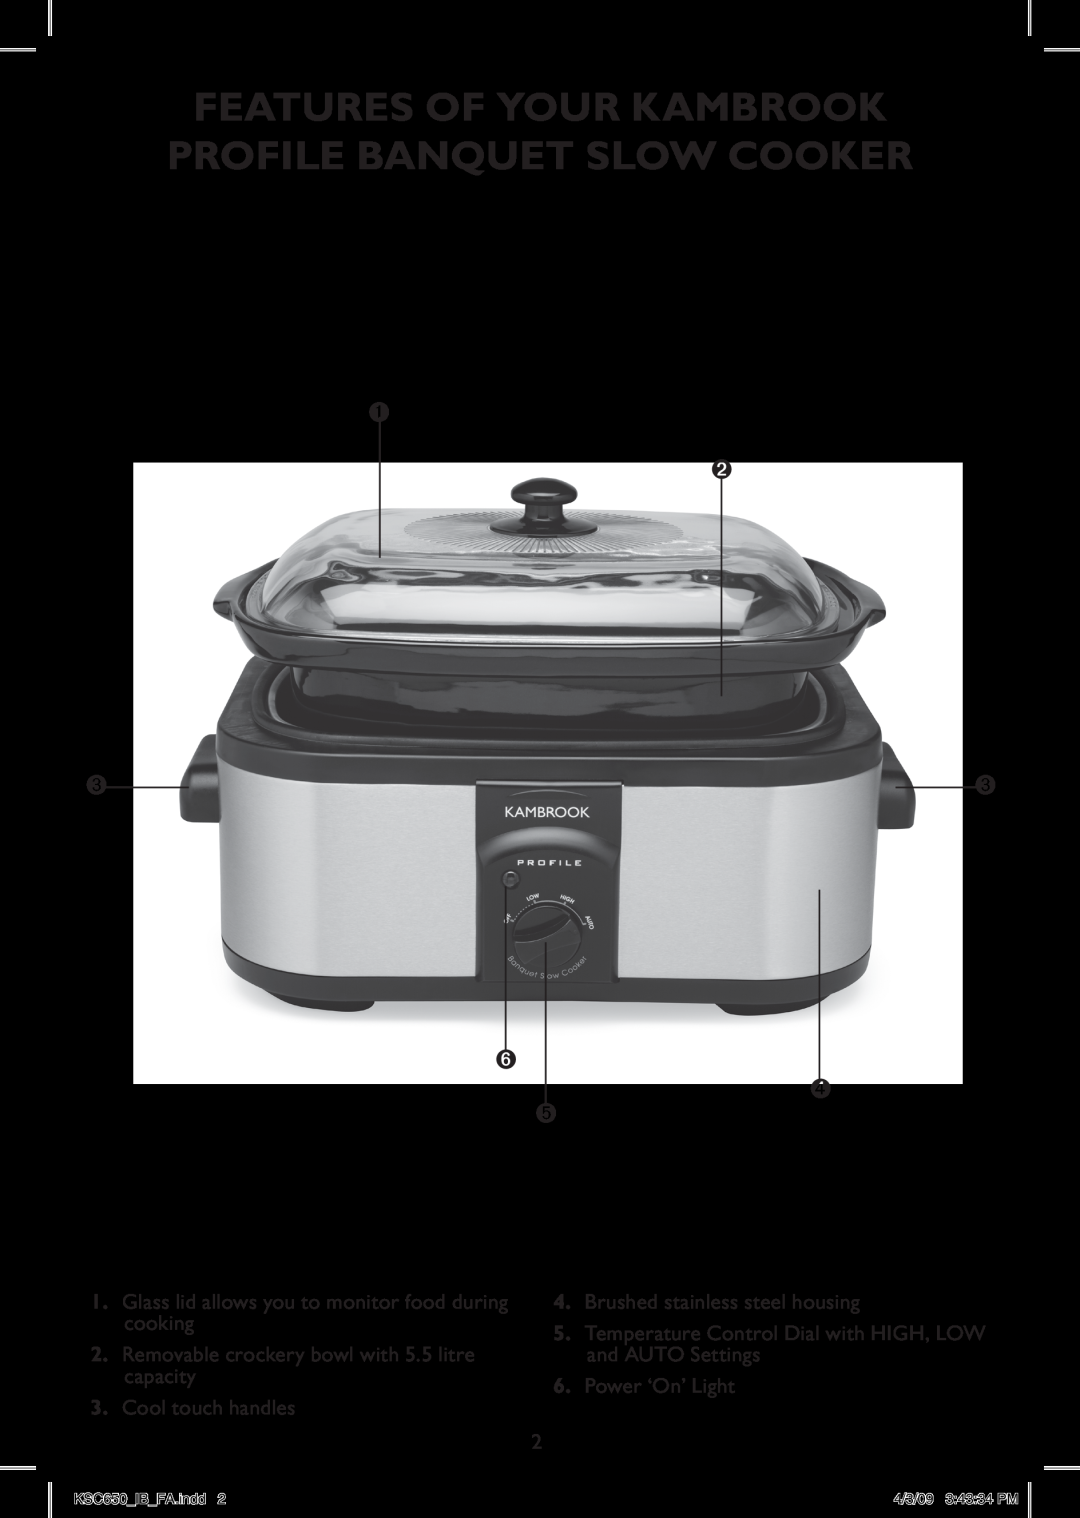 Kambrook KSC650 manual FEATURES OF YOUR Kambrook PROFILE BANQUET Slow Cooker, › ™ š, Cool touch handles, Power ‘On’ Light 